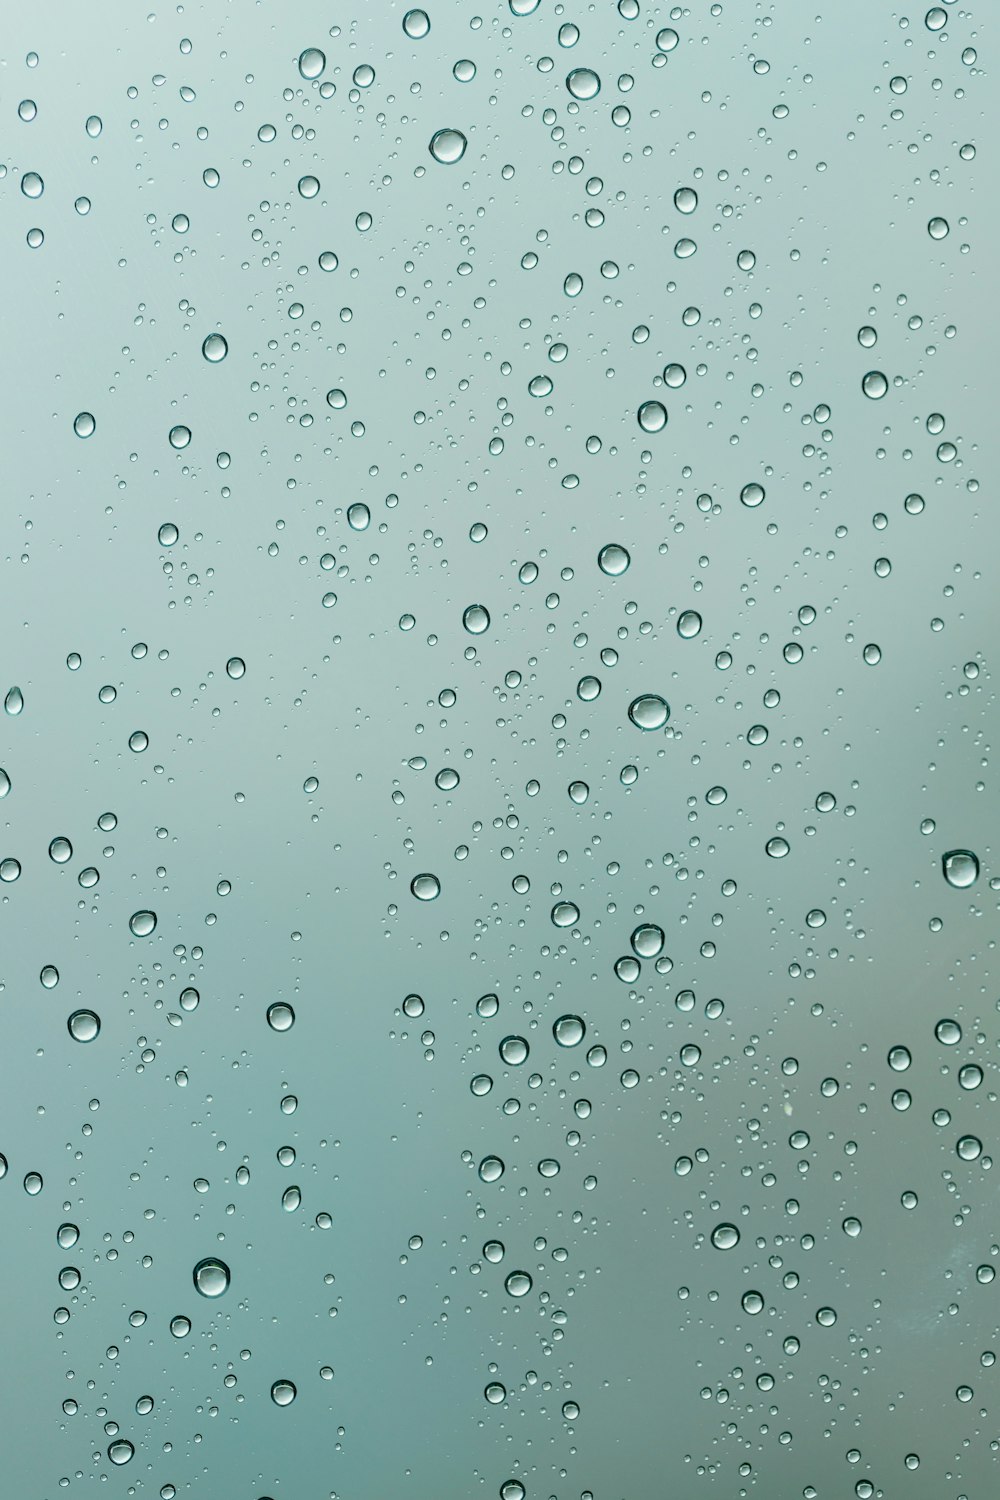 45,628+ Rain Drops On Window Pictures | Download Free Images on Unsplash